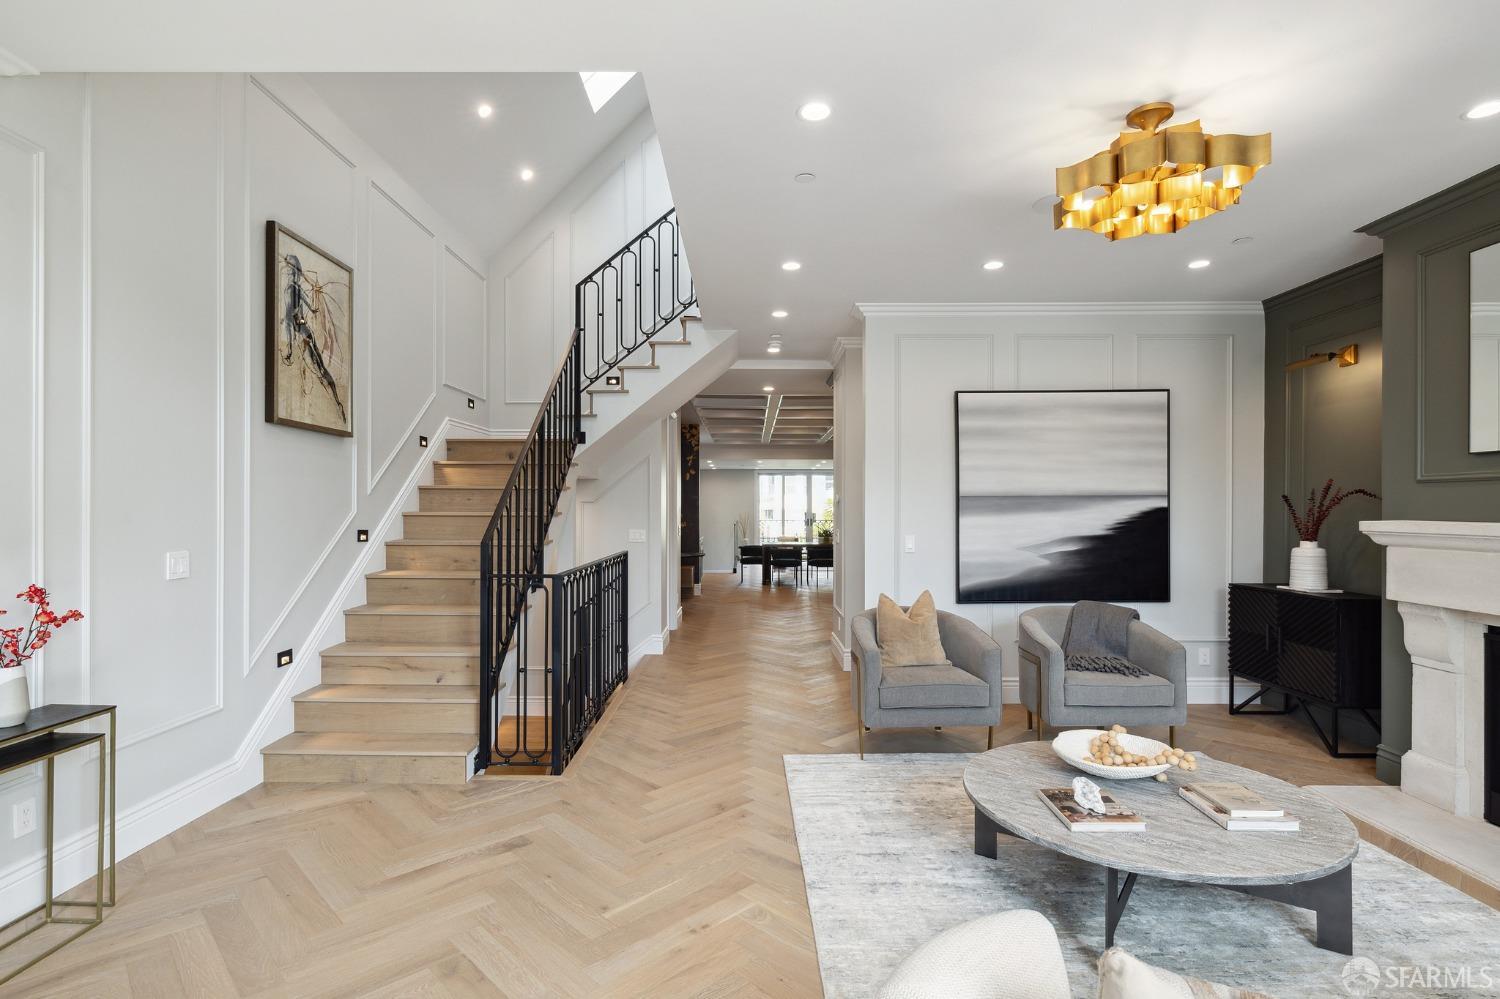 Step into modern elegance at 152 4th Avenue, a beautifully remodeled Victorian home in San Francisco's Lake Street neighborhood. This classic-meets-contemporary gem showcases fabulous entertaining spaces, feat. a LR w/ stone fireplace, white oak floors set in a striking herringbone pattern & high ceilings with skylights providing an airy and open ambiance. Well-appointed kitchen with a central island clad in Italian marble, a stunning Italian range, a butler's pantry and breakfast nook. The DR with its wet bar, and flows into the lounge area overlooking the yard. A tucked away powder room offers additional convenience for your guests. Upstairs, 3 well proportioned bedrooms & 2 baths, incl. a luxurious primary suite with sitting area, walk-in closet and terrace. The lower level offers a media room w/ wet bar & storage, 2 more bedrooms, one of them en-suite and 2 baths.The leveled backyard offers the perfect canvas for child play, gardening, and outdoor entertaining with a tiled patio area . A laundry room,1-car garage w/ EV charger, radiant floor heating, and built-in speakers add practicality to luxury living. New systems throughout incl. new plumbing, electrical, HVAC, sprinklers, foundation & roof. A+ location close to local restaurants & shops and minutes from the Presidio.